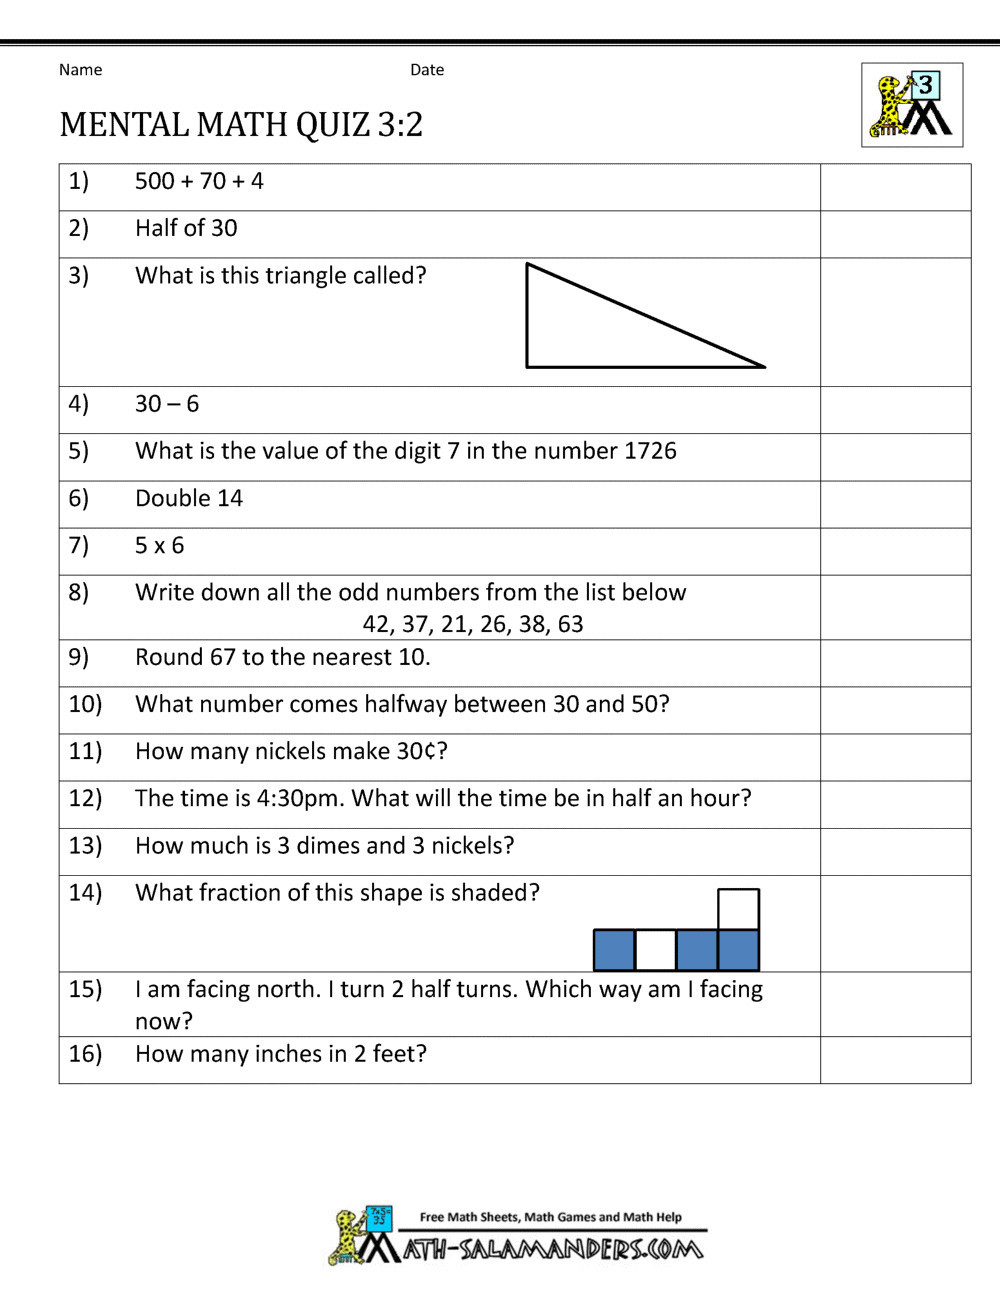 Mental Math Worksheets Grade 6 3 Subject and Object Questions Exercises Template